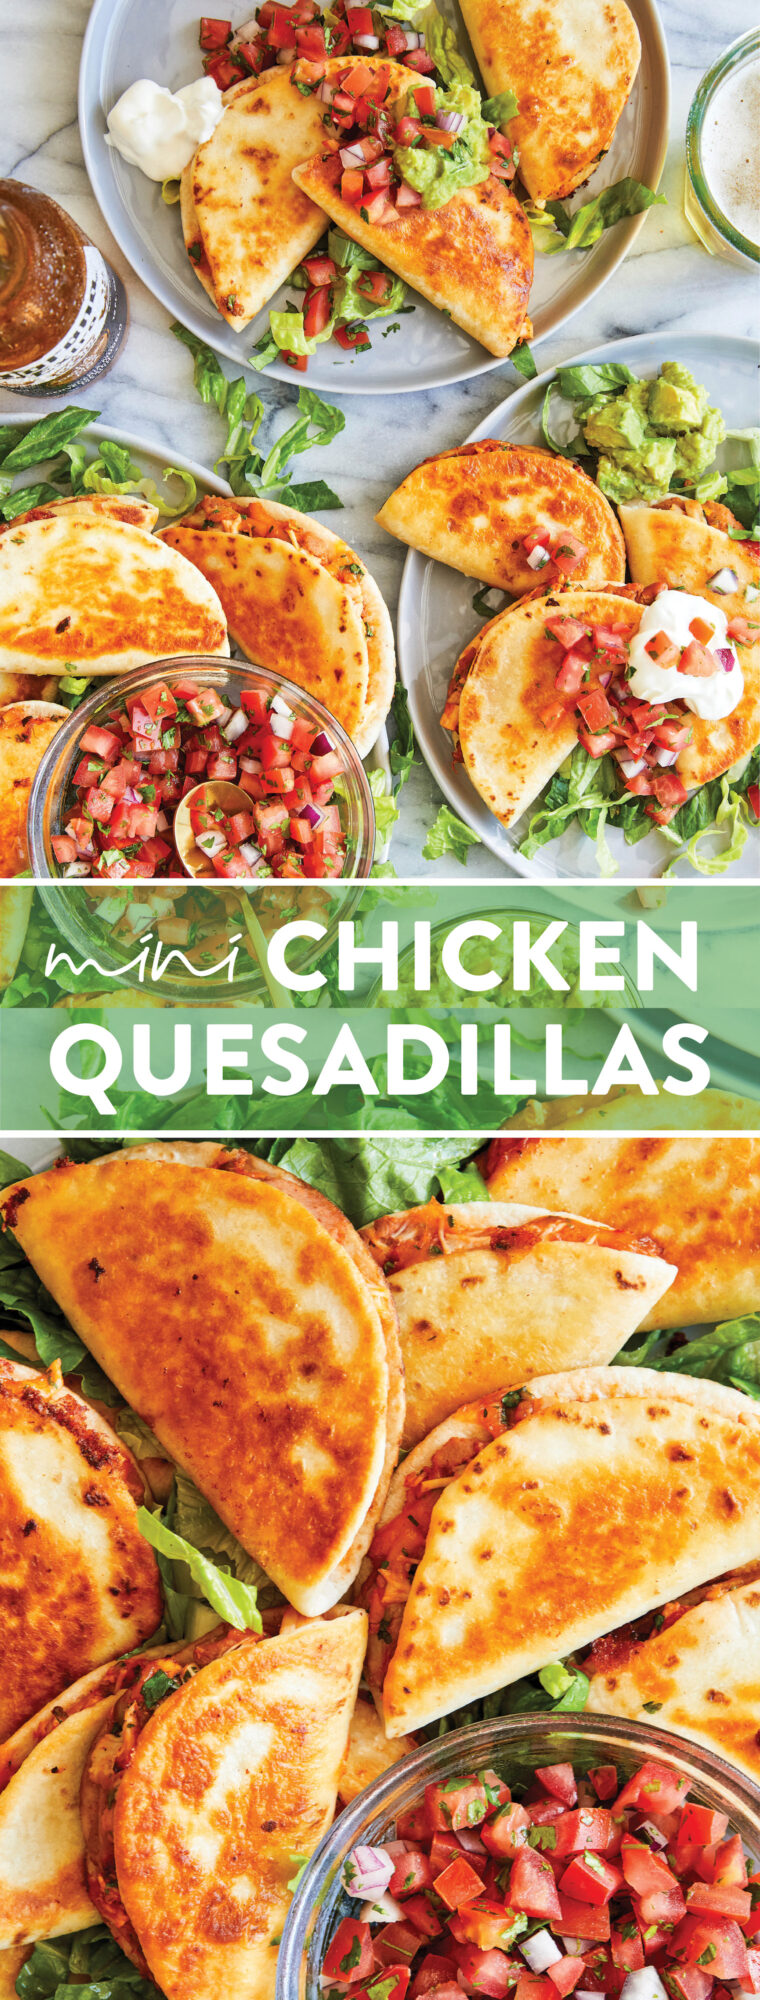 Mini Chicken Quesadillas - Crowd-pleasing snack-size quesadillas with refried beans, leftover rotisserie chicken + melted cheese! SO SO GOOD!